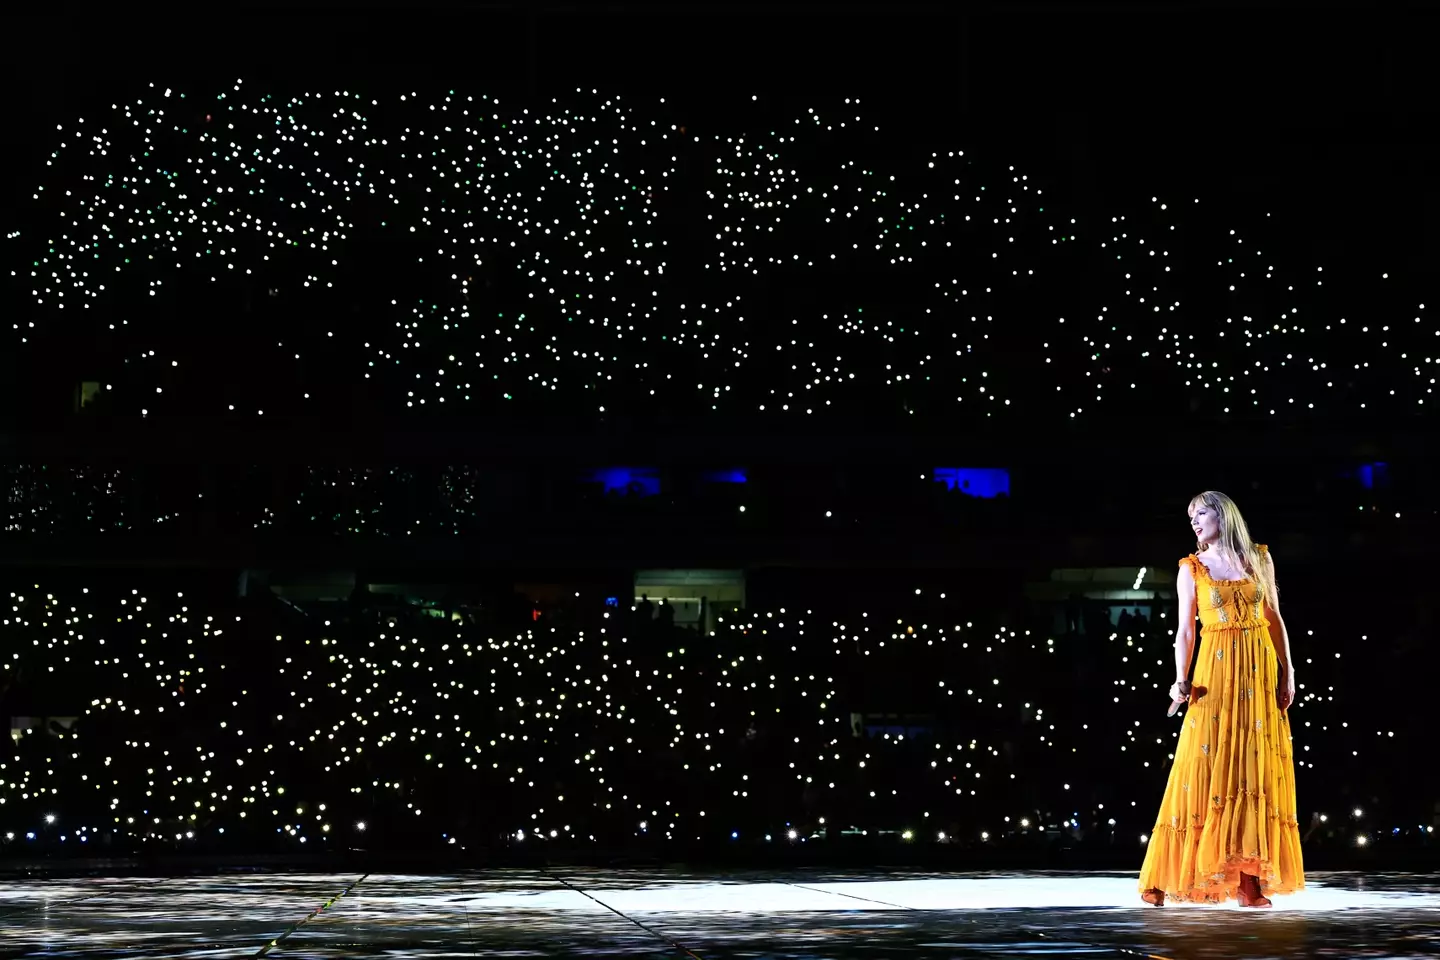 Taylor Swift announced that she was postponing a concert after a fan died.